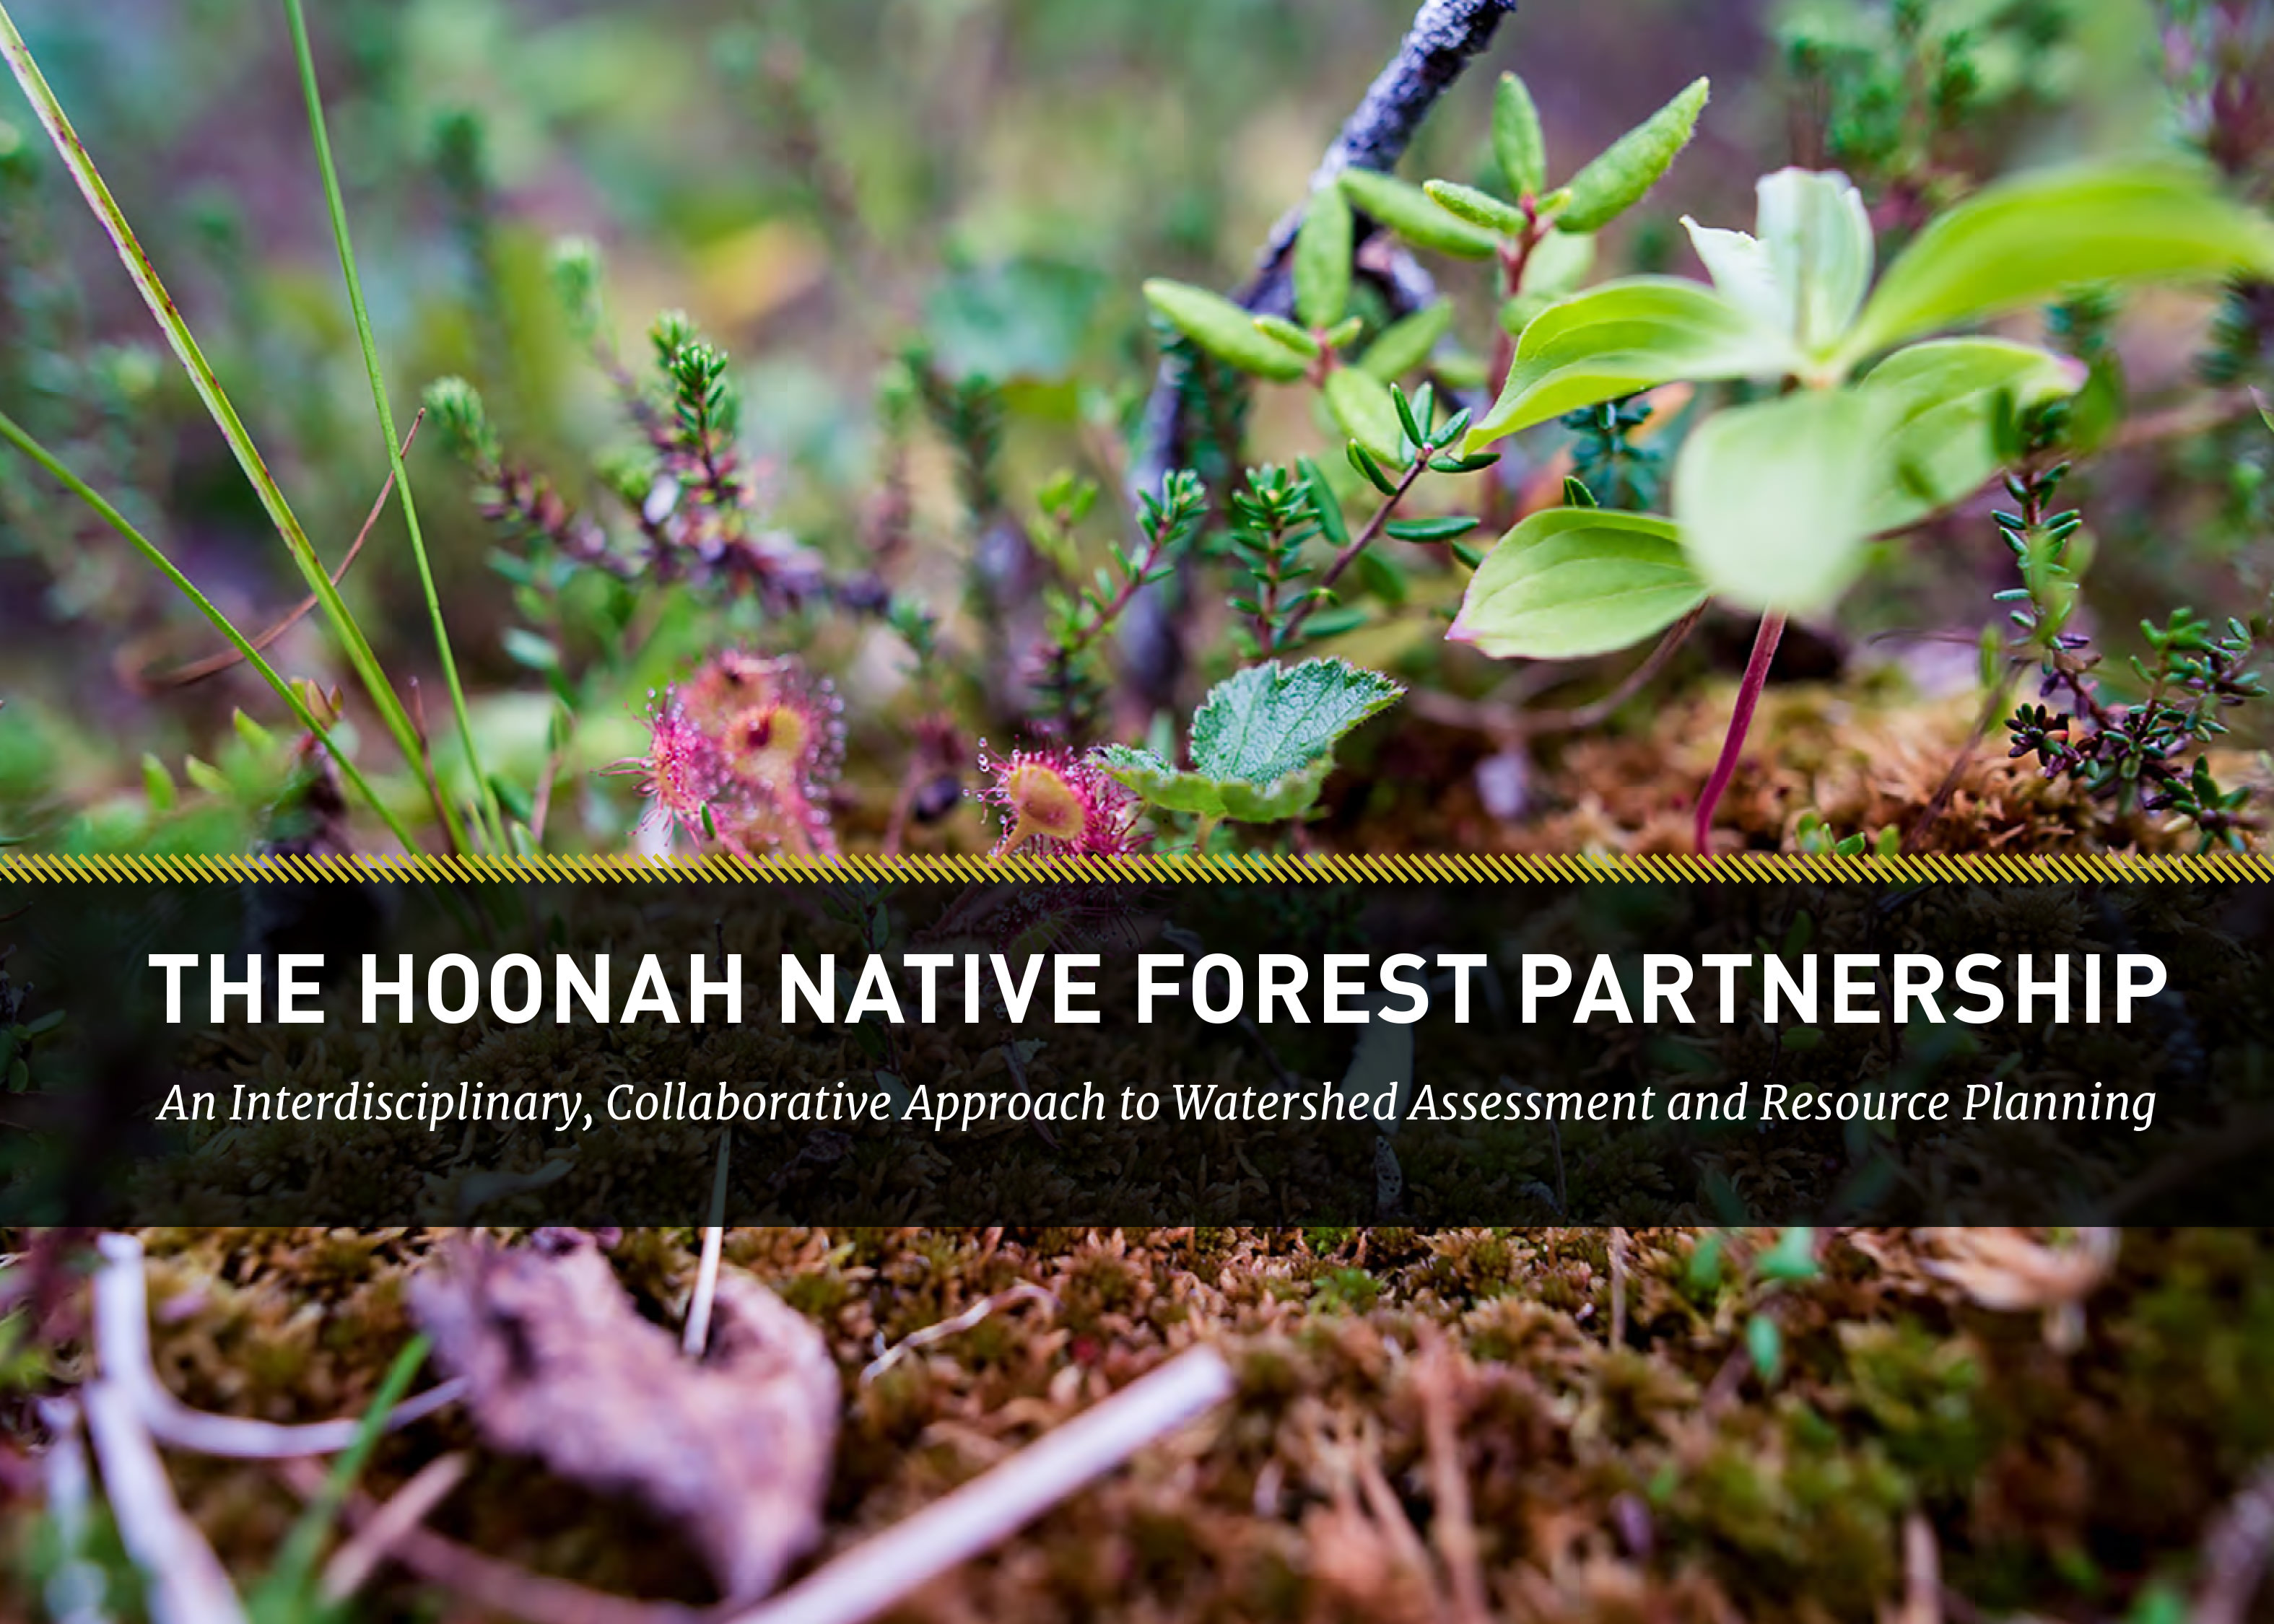 A comprehensive report from the Hoonah Native Forest Partnership.